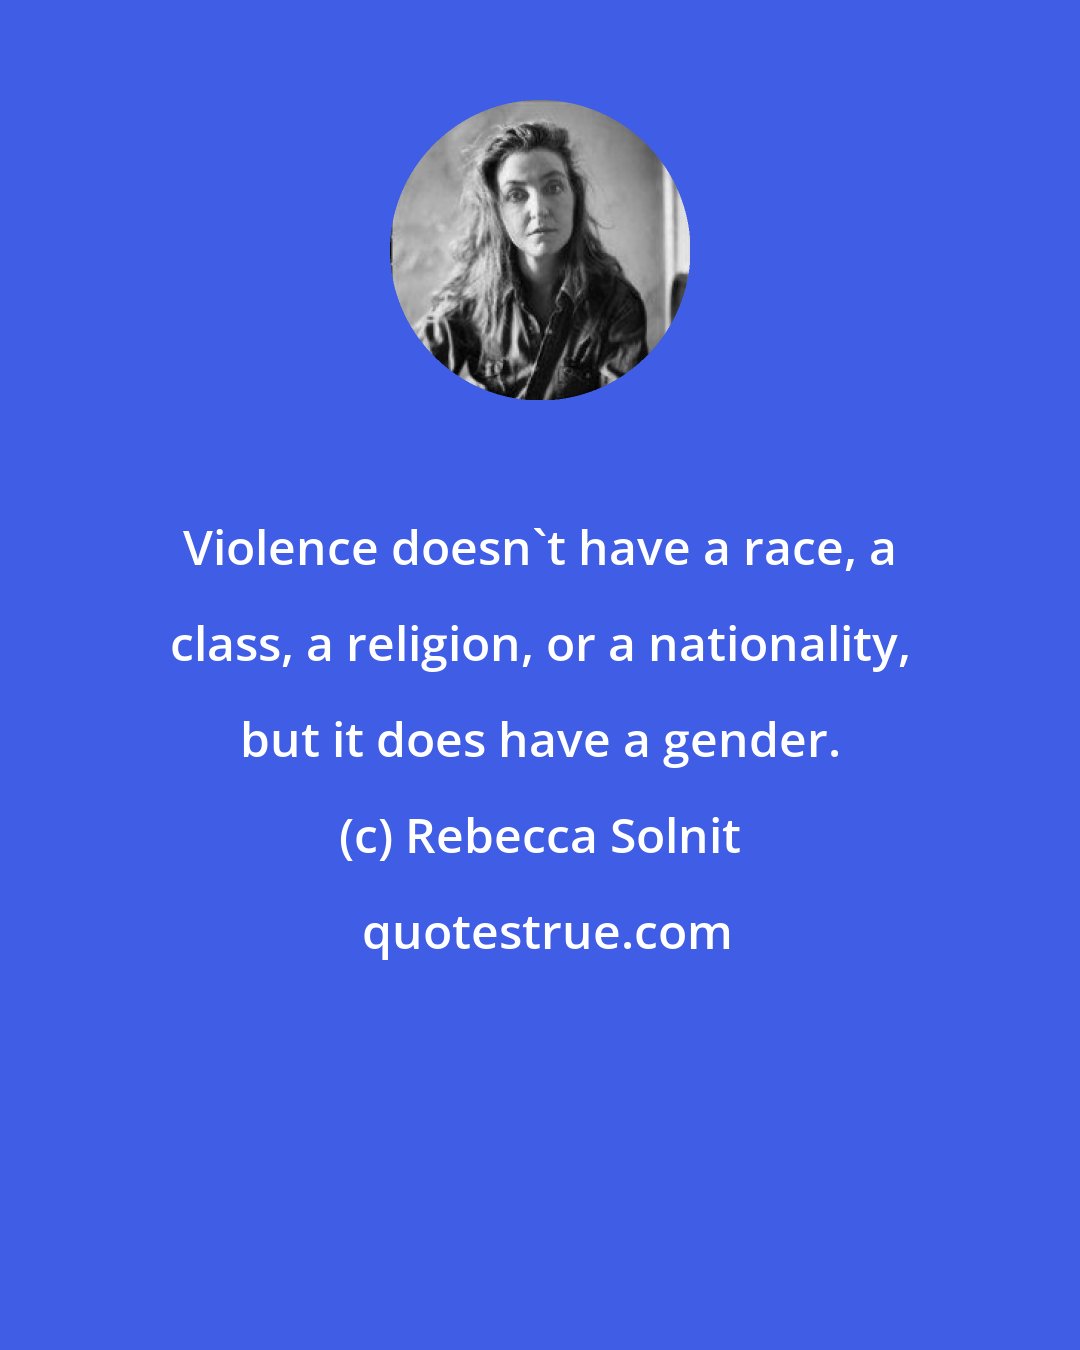 Rebecca Solnit: Violence doesn't have a race, a class, a religion, or a nationality, but it does have a gender.